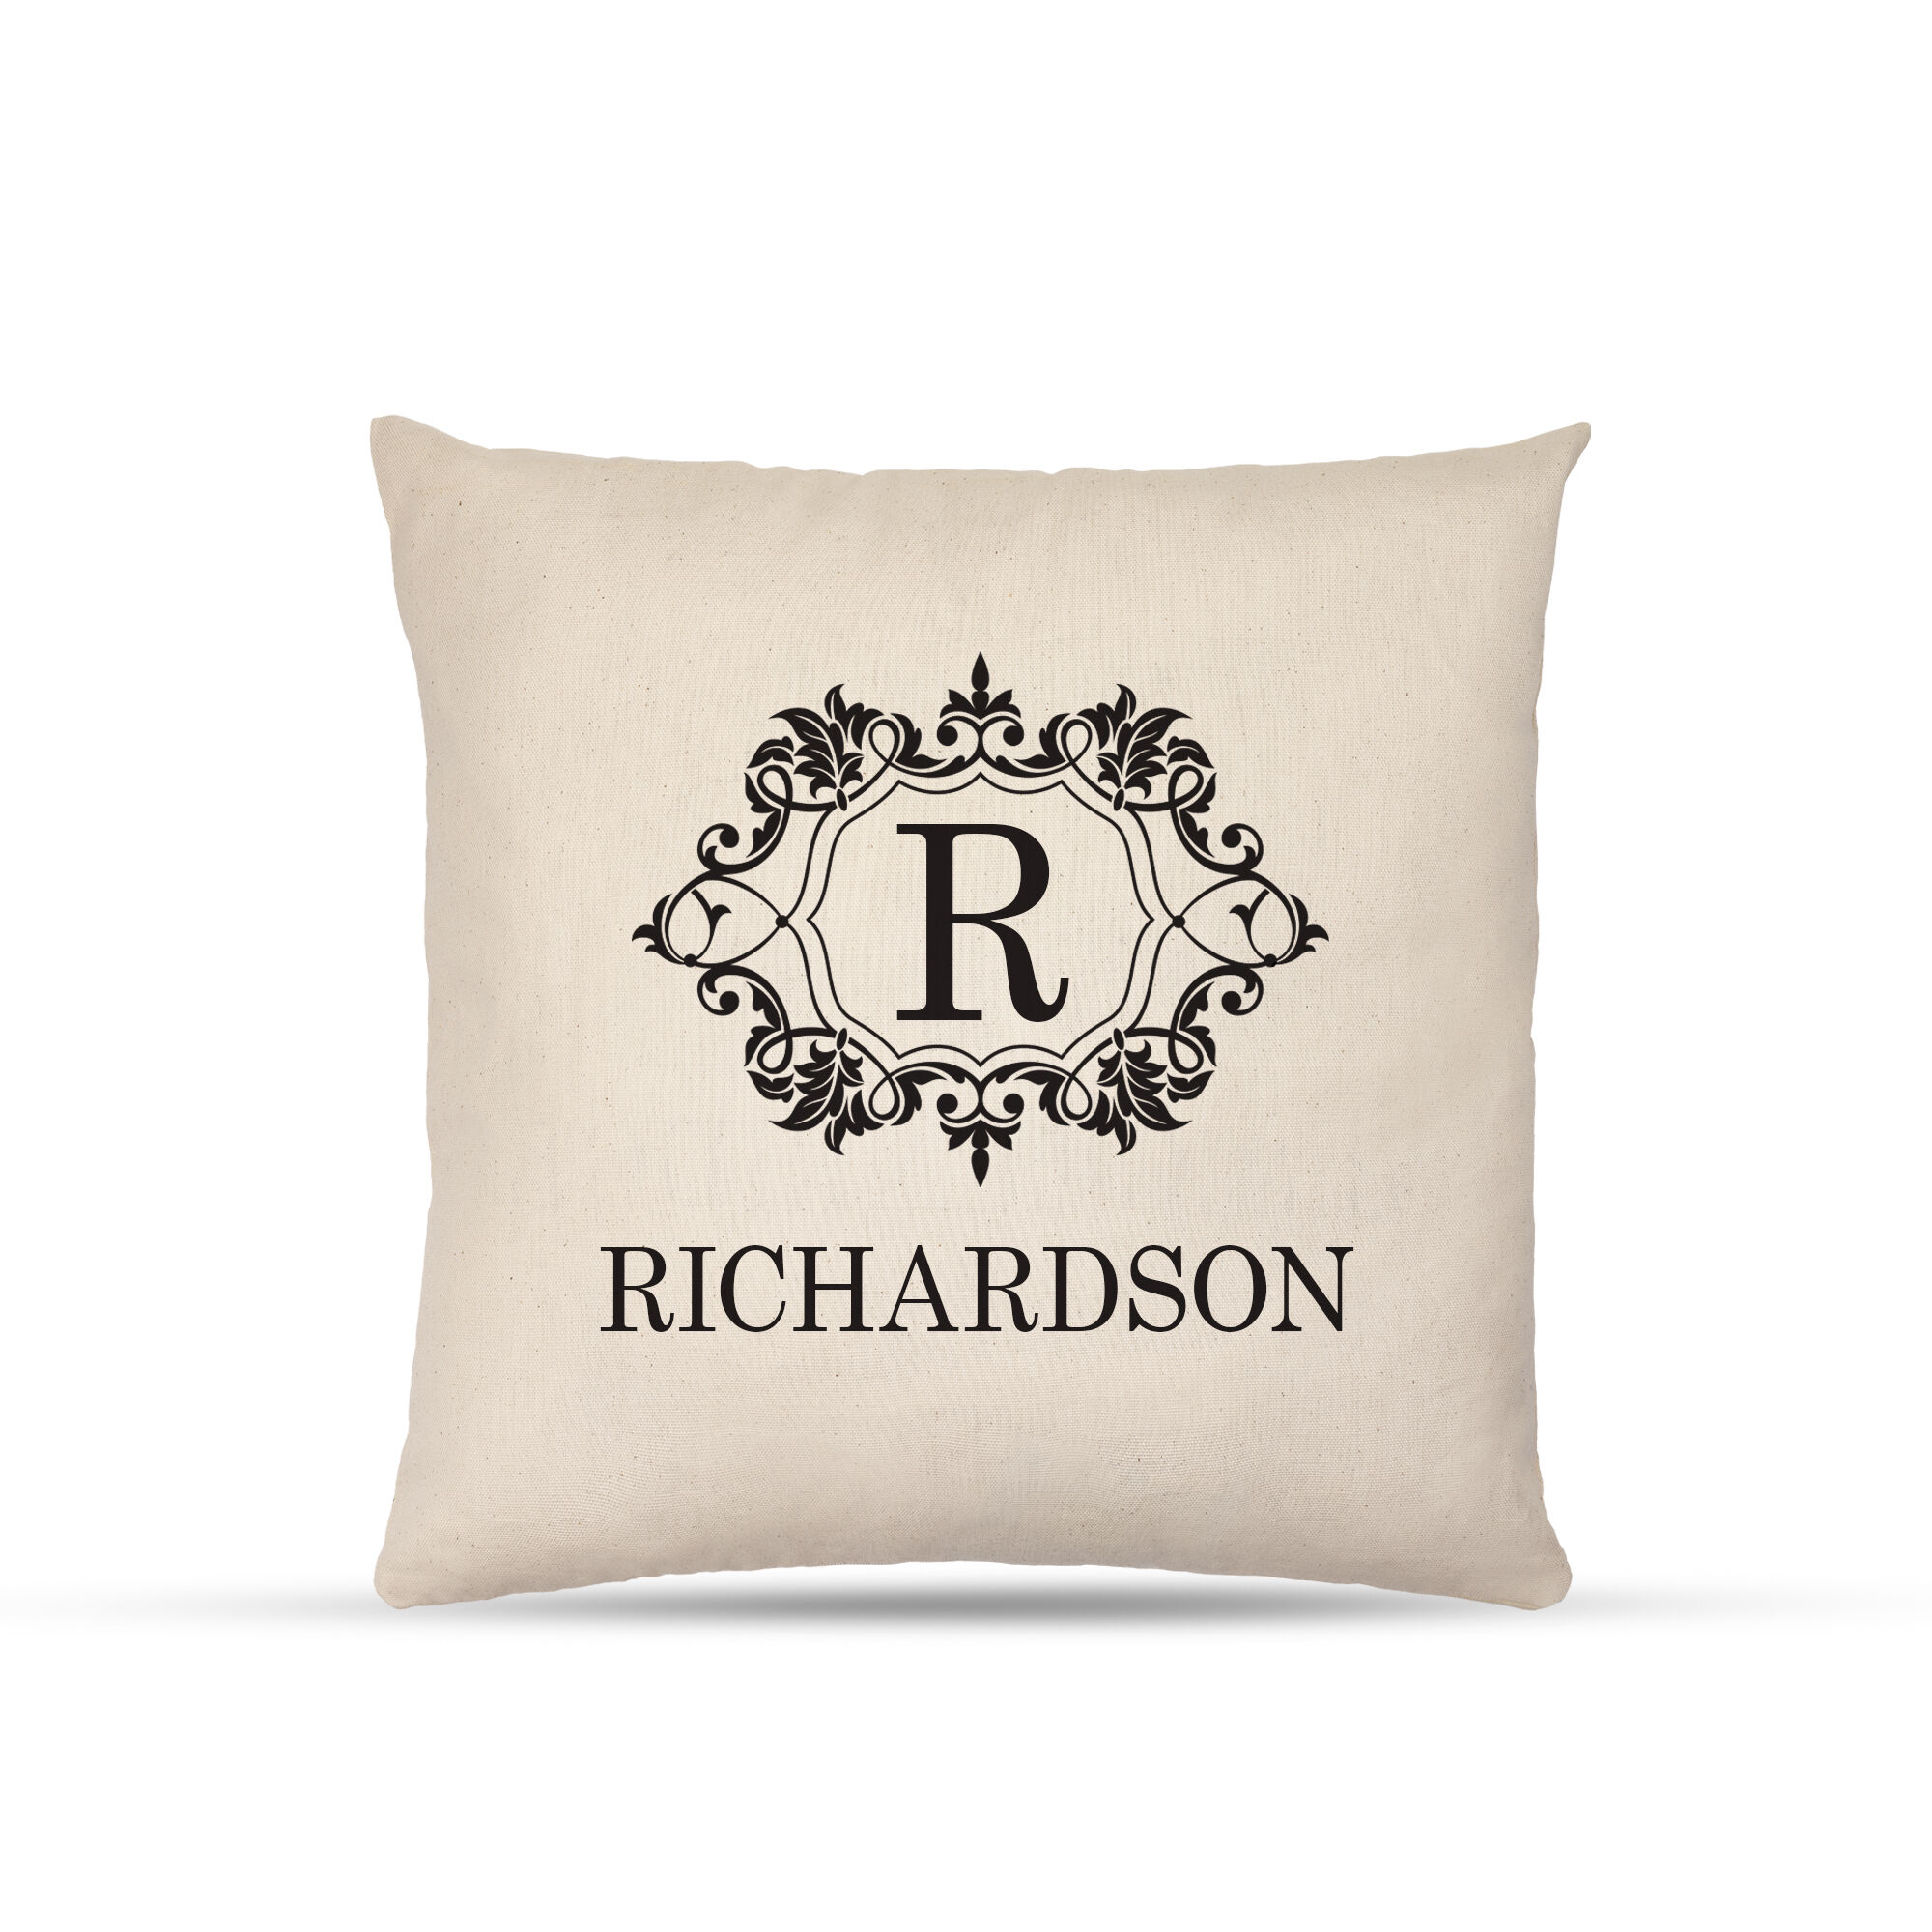 The Personalized Throw Pillow 10920 0014 a main